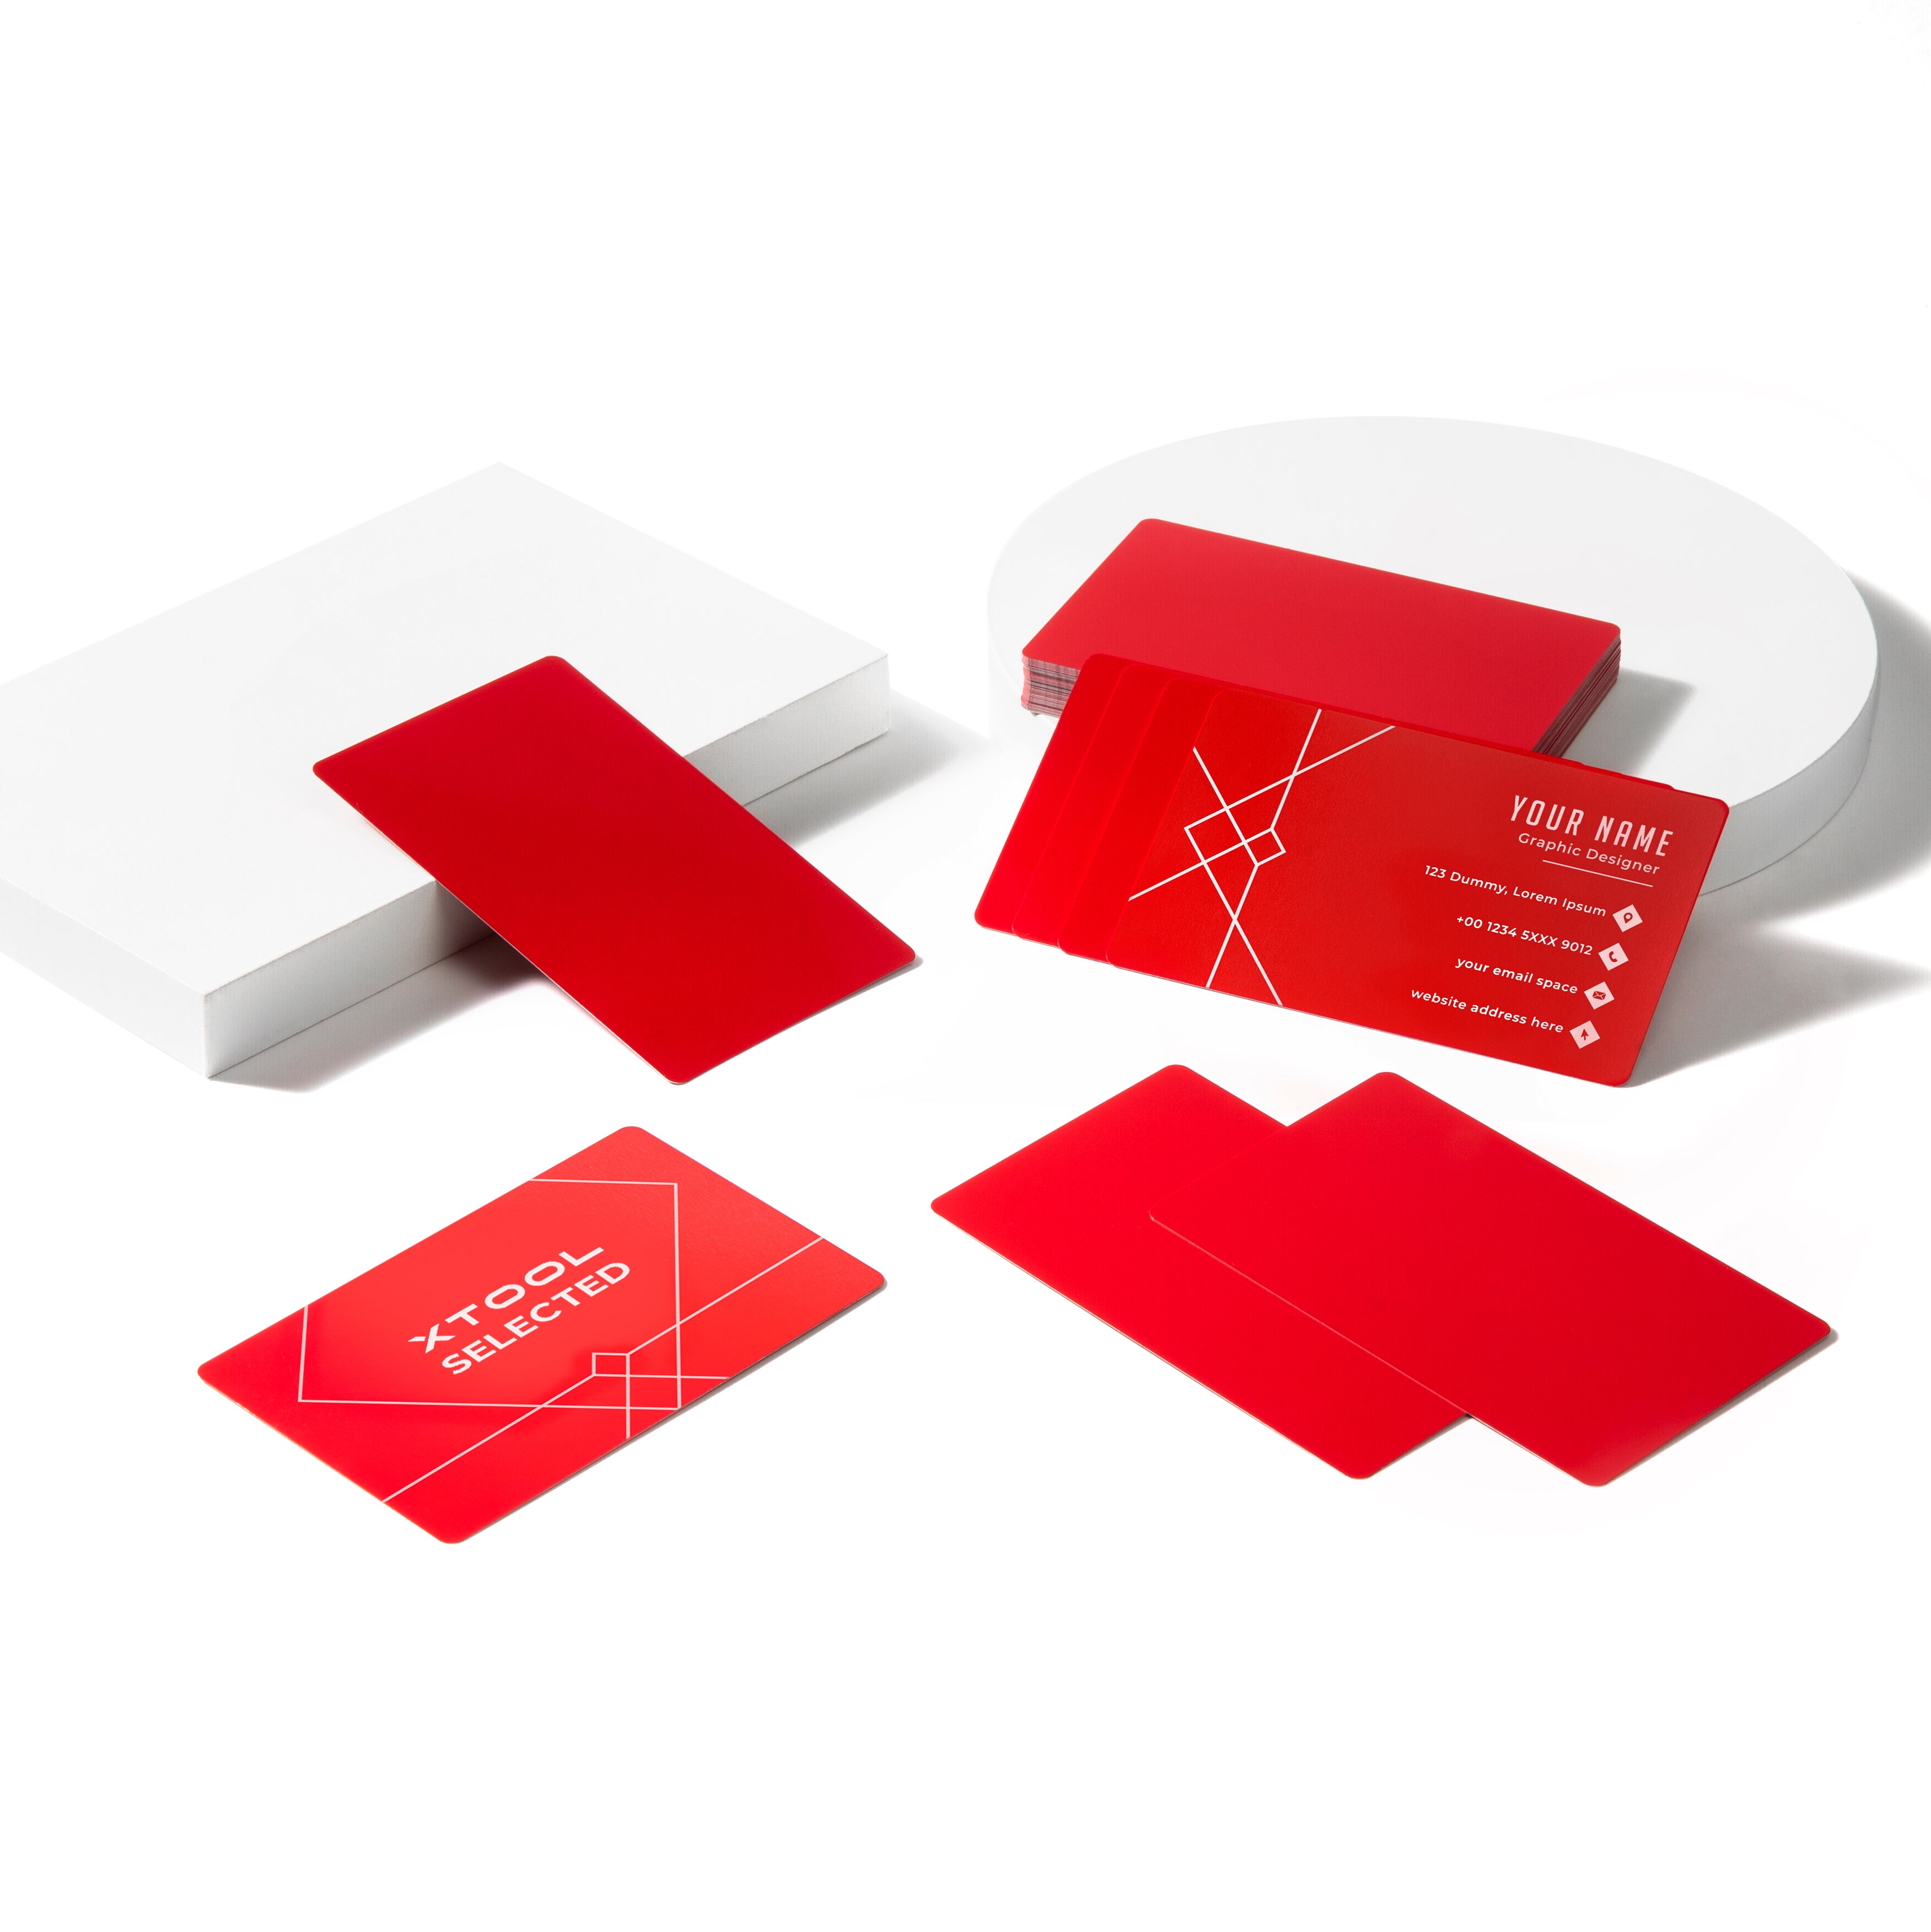 Red Metal Business Cards (60pcs)